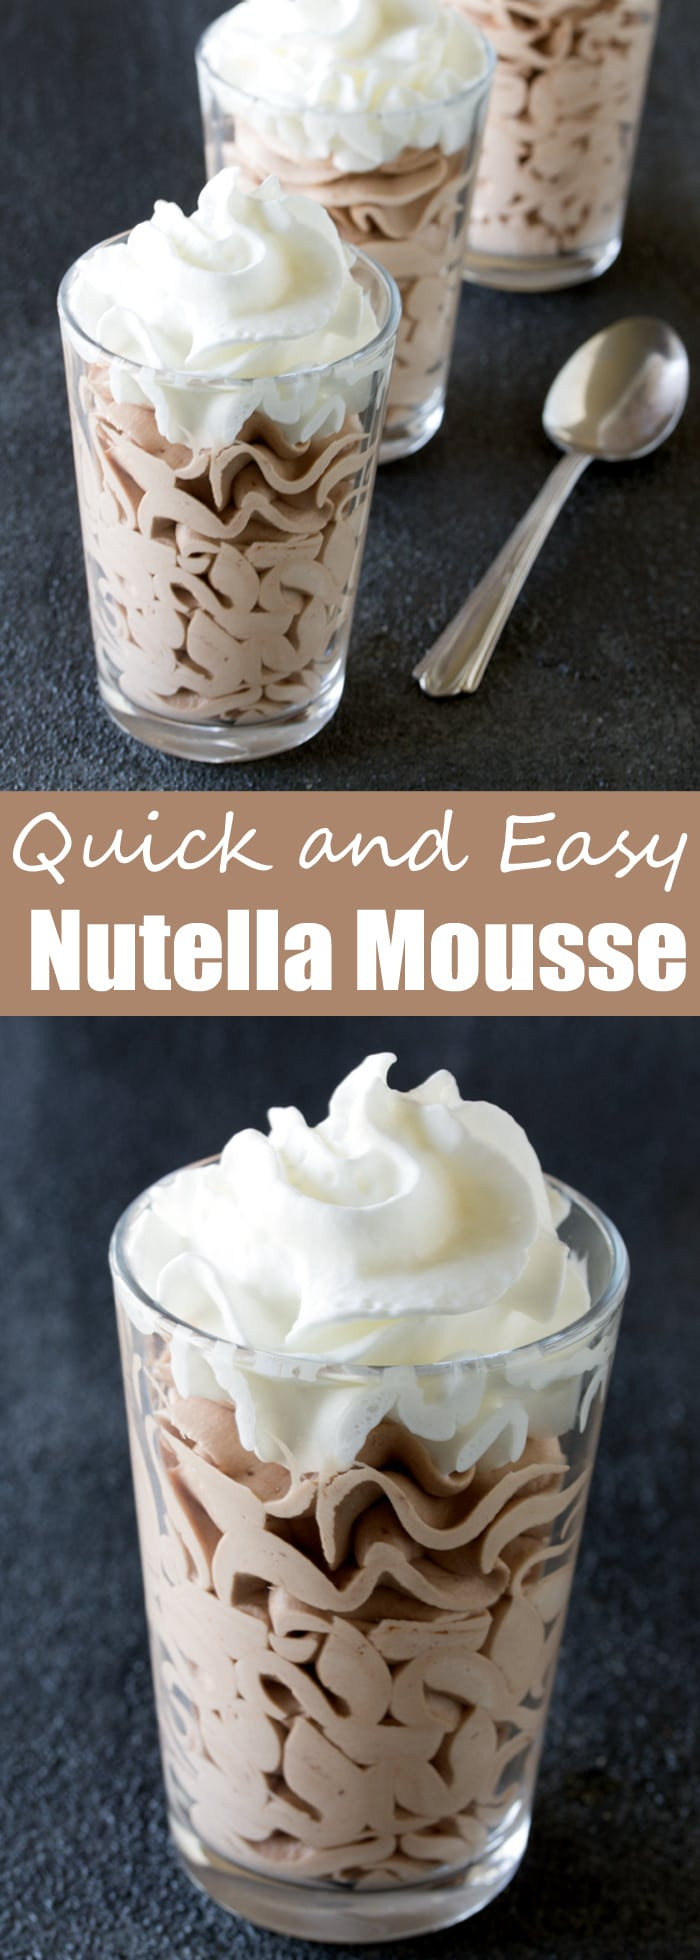 Easy Nutella Dessert
 Quick and Easy Nutella Mousse